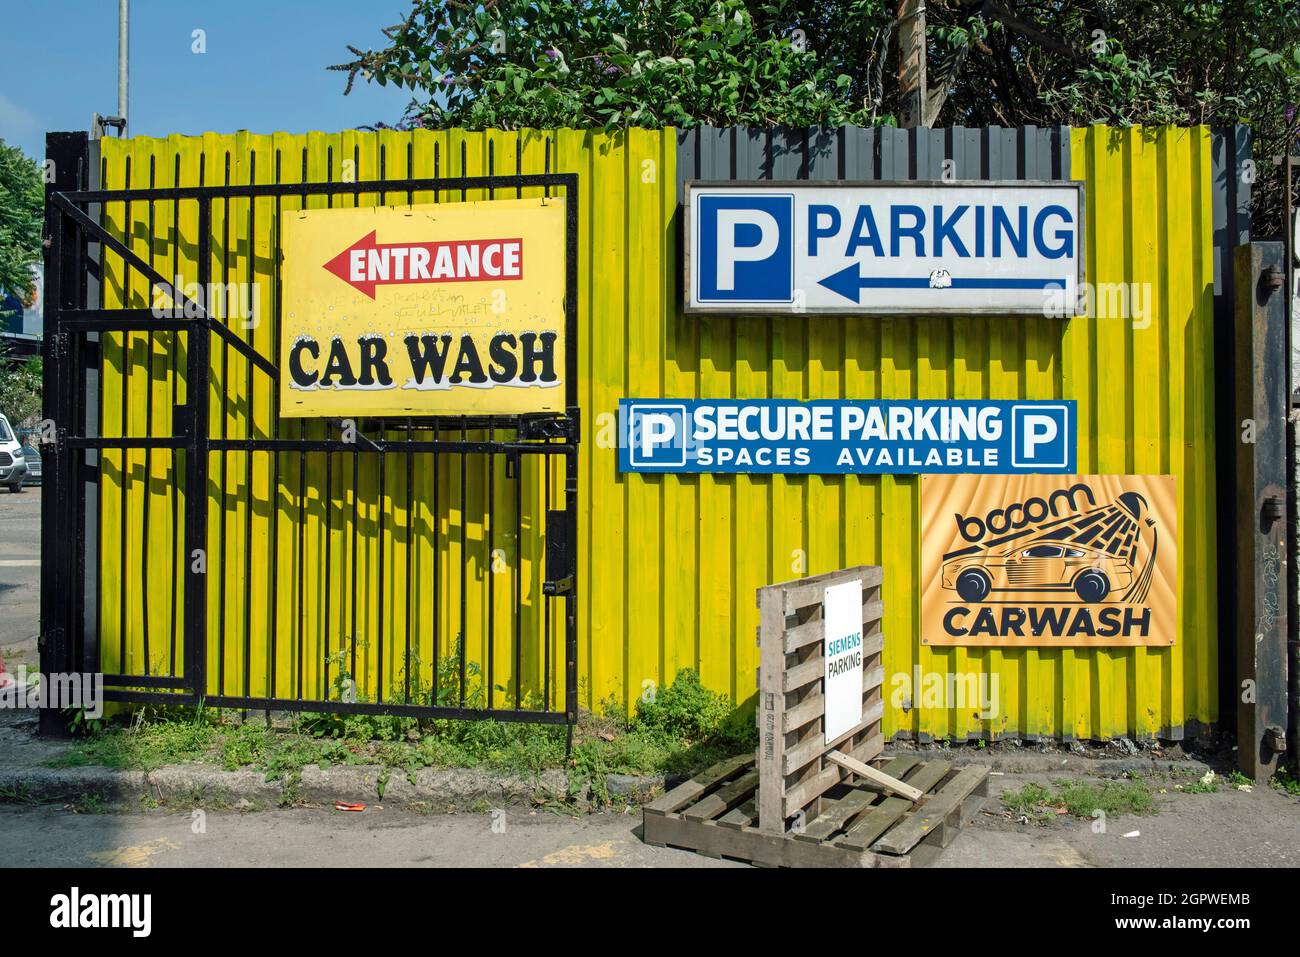 Entrance to car wash behind brightly painted yellow fence, secure parking available, Holloway, London Borough of Islington Stock Photo